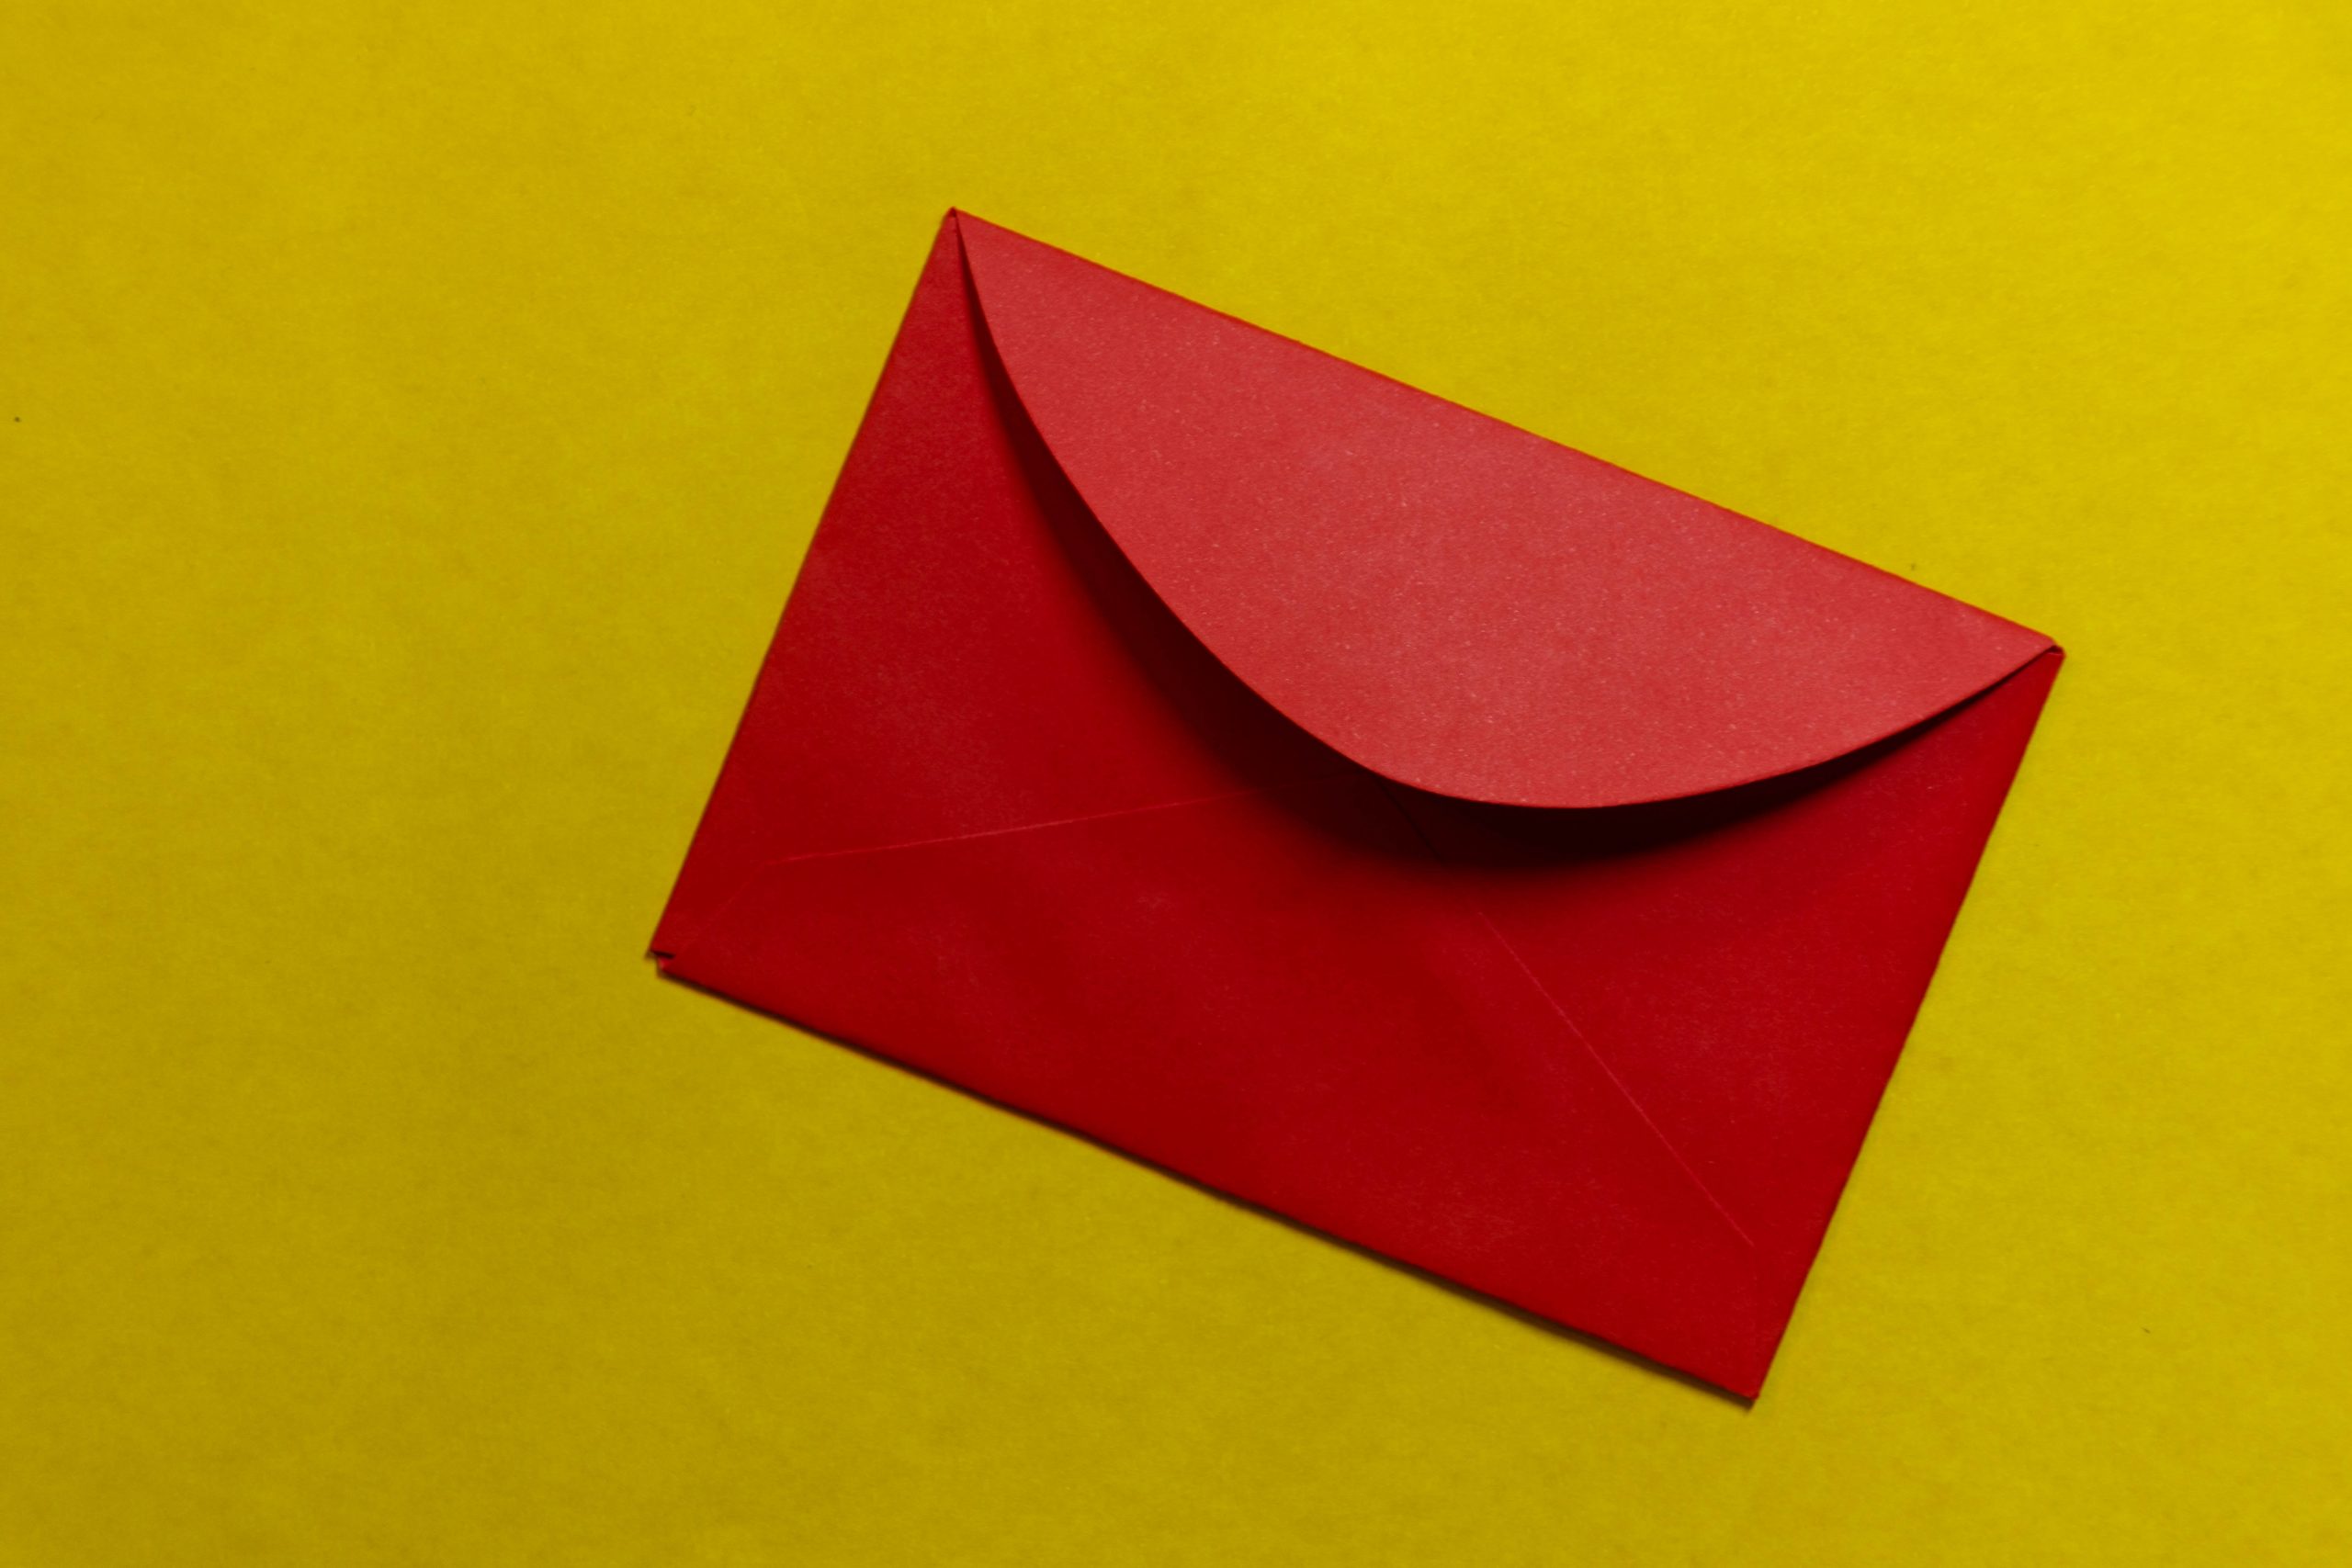 Red envelope on a yellow background